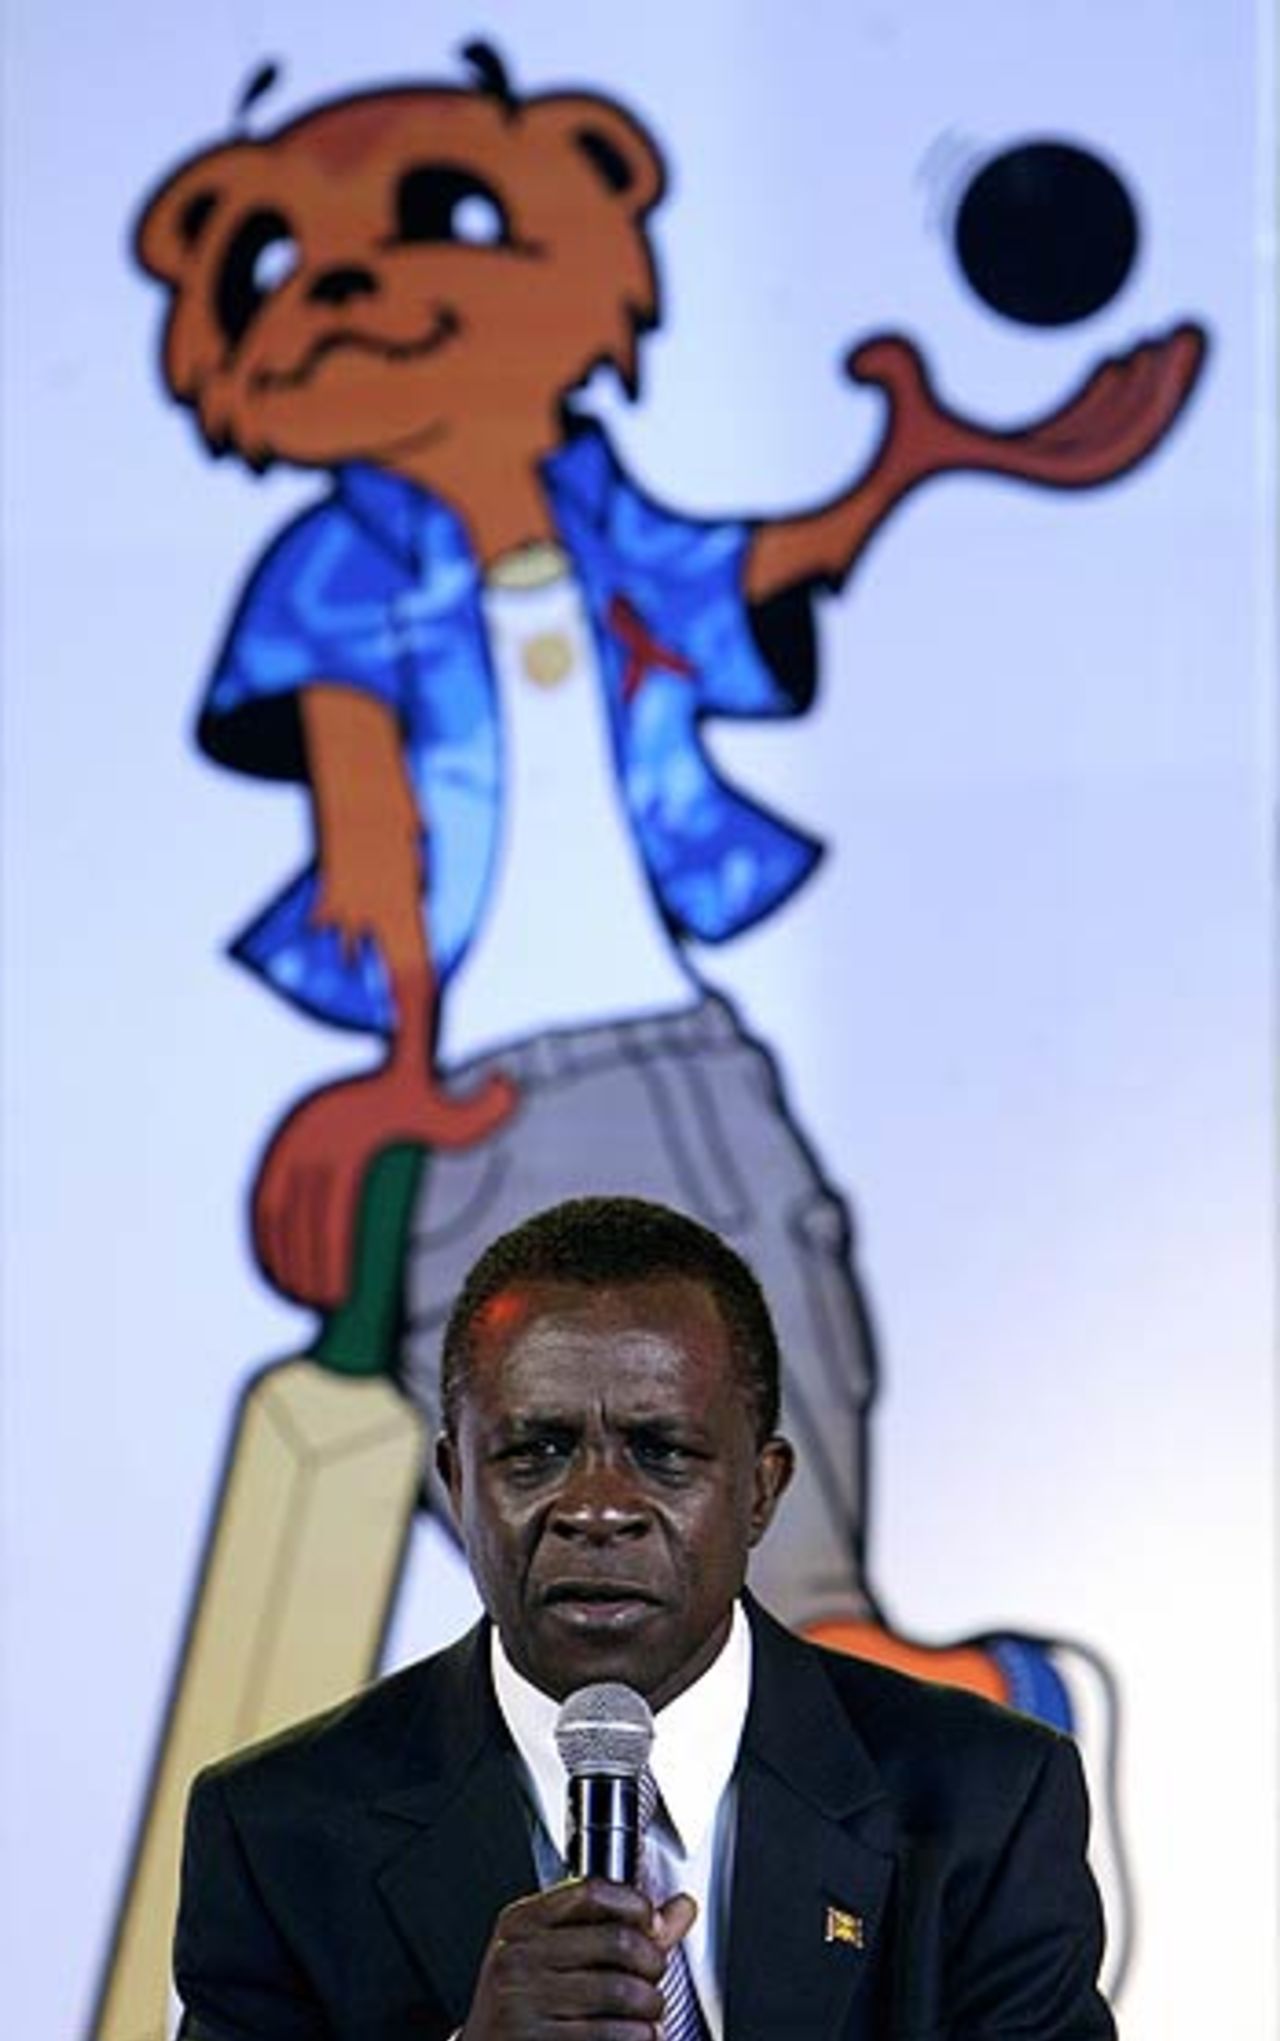 Mello, the 2007 World Cup's mascot, is in the background as Keith Mitchell, the prime minister of Grenada, addresses the media at the launch of the World Cup logo, mascot and the tournament schedule, New Delhi, July 27, 2006